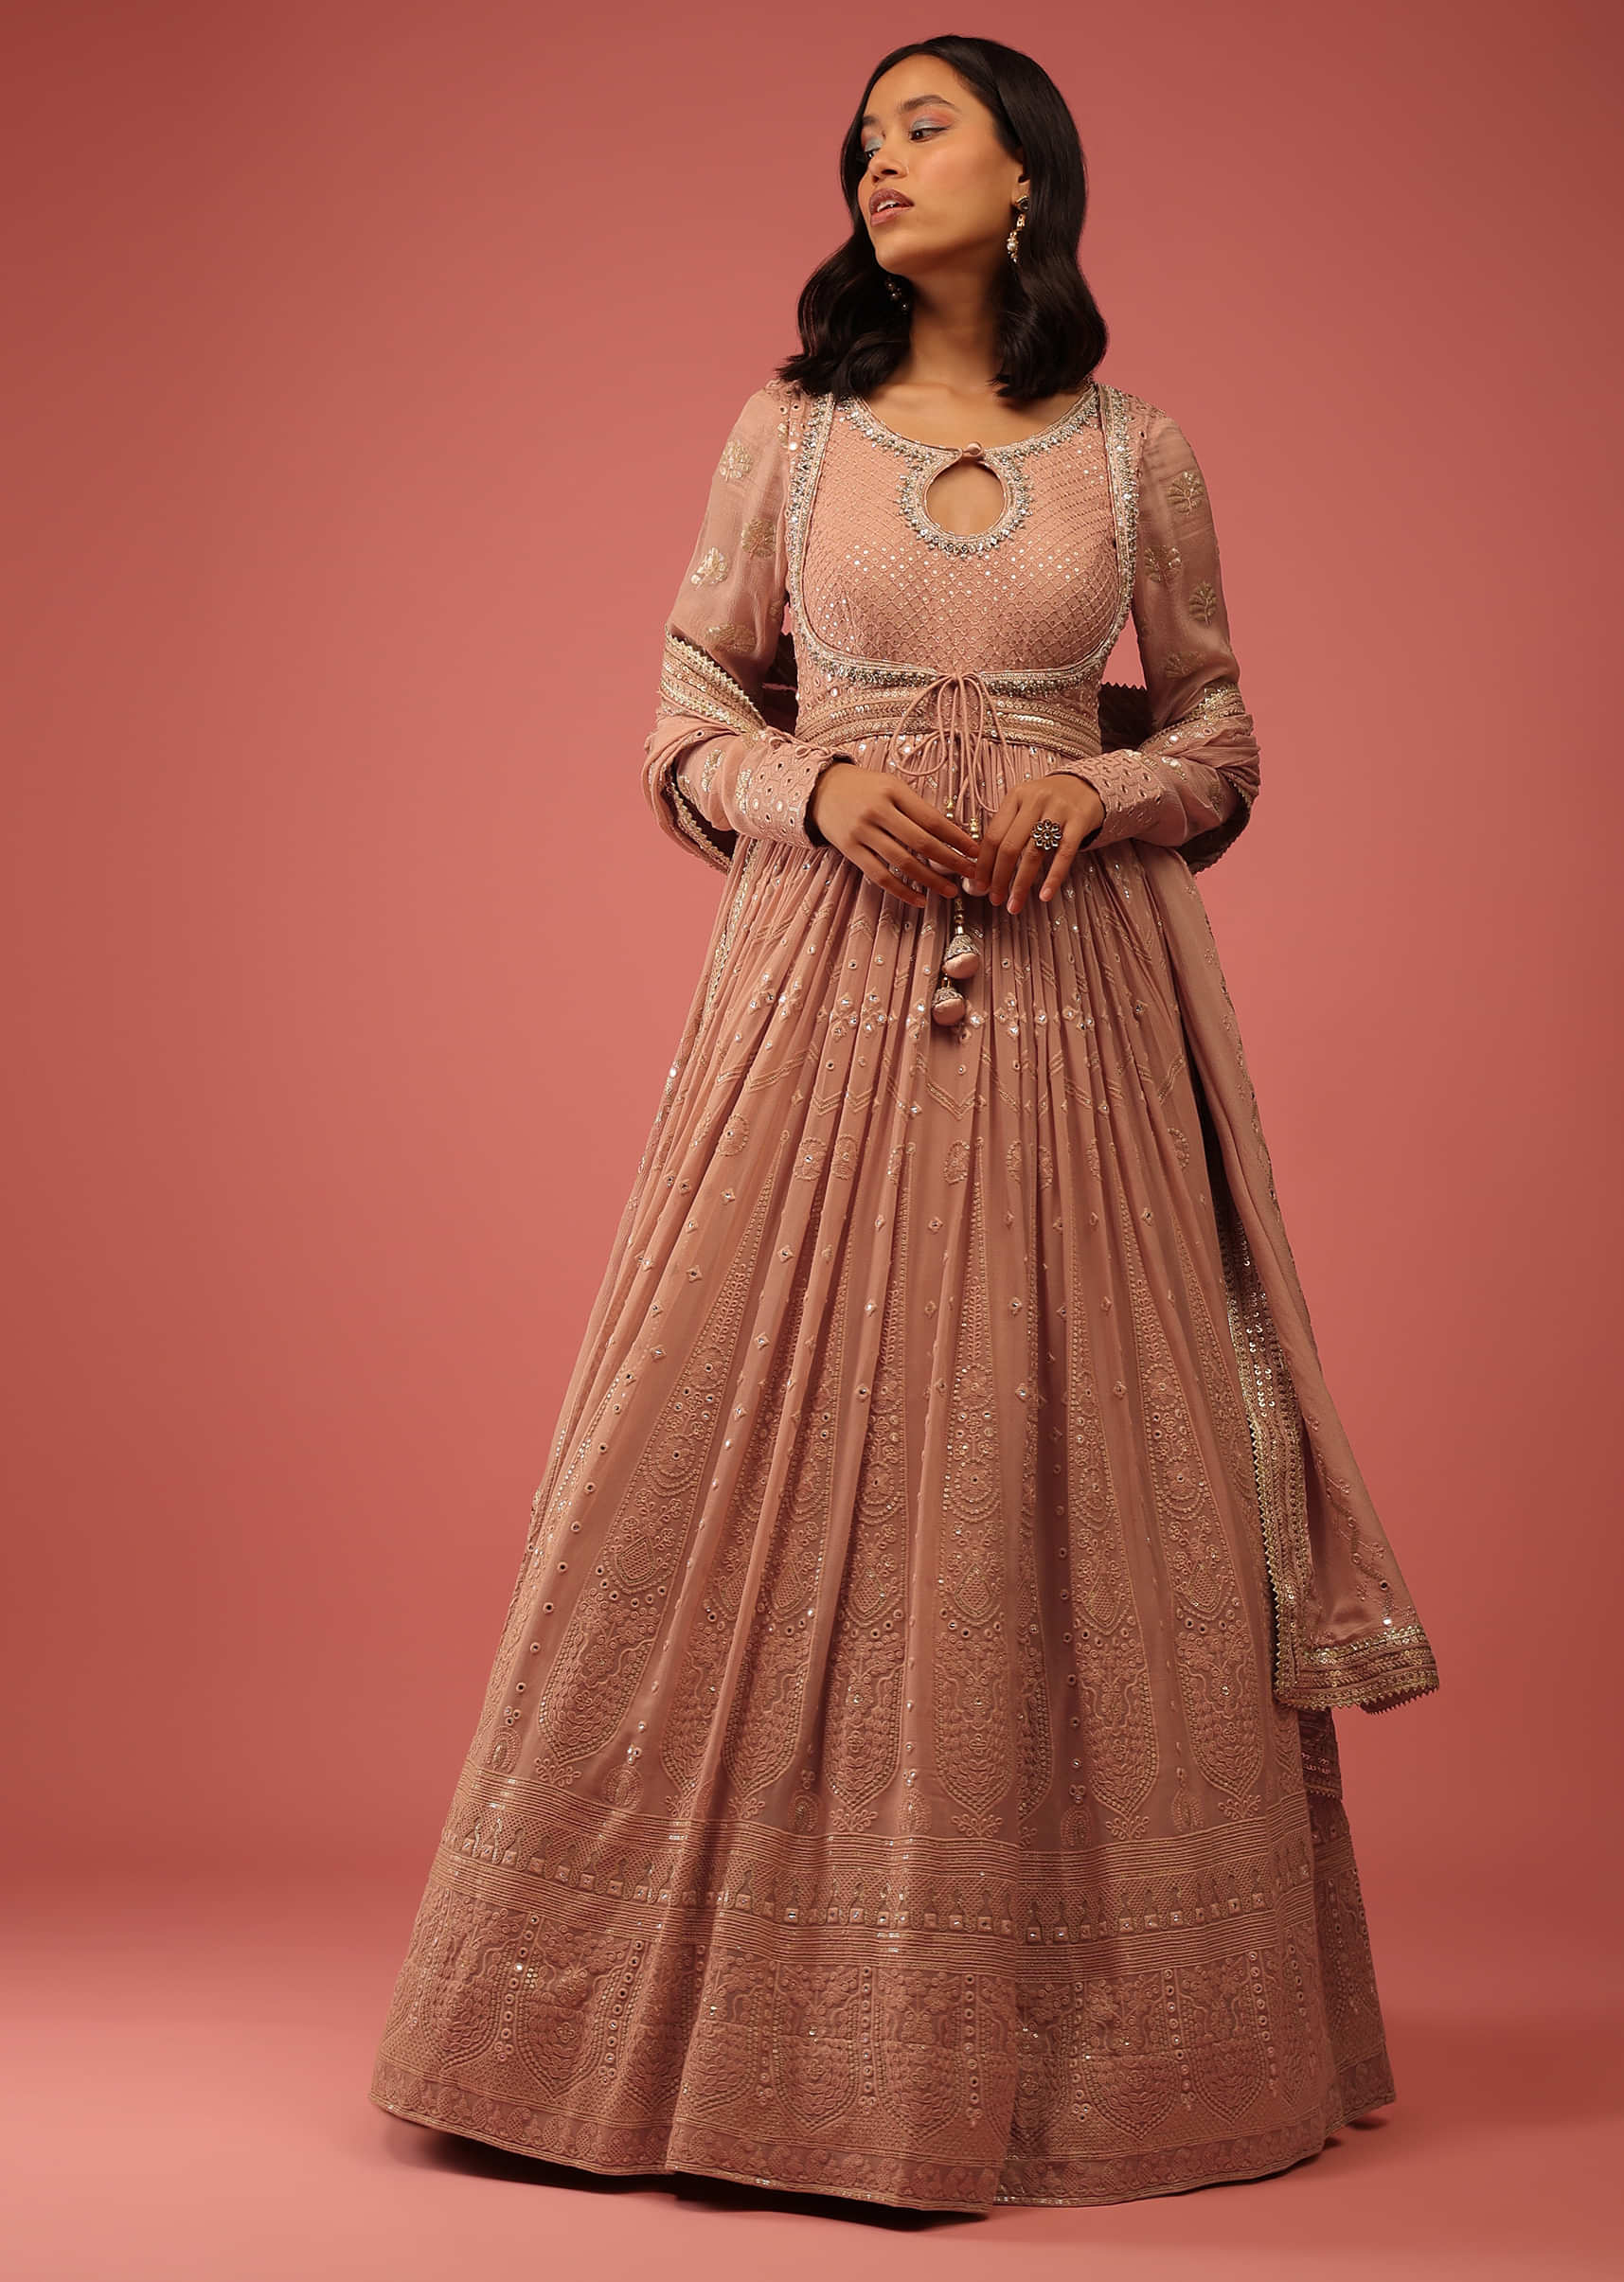 Nude White Anarkali Suit In Georgette With Lucknowi Resham Work And Attached Jacket Design